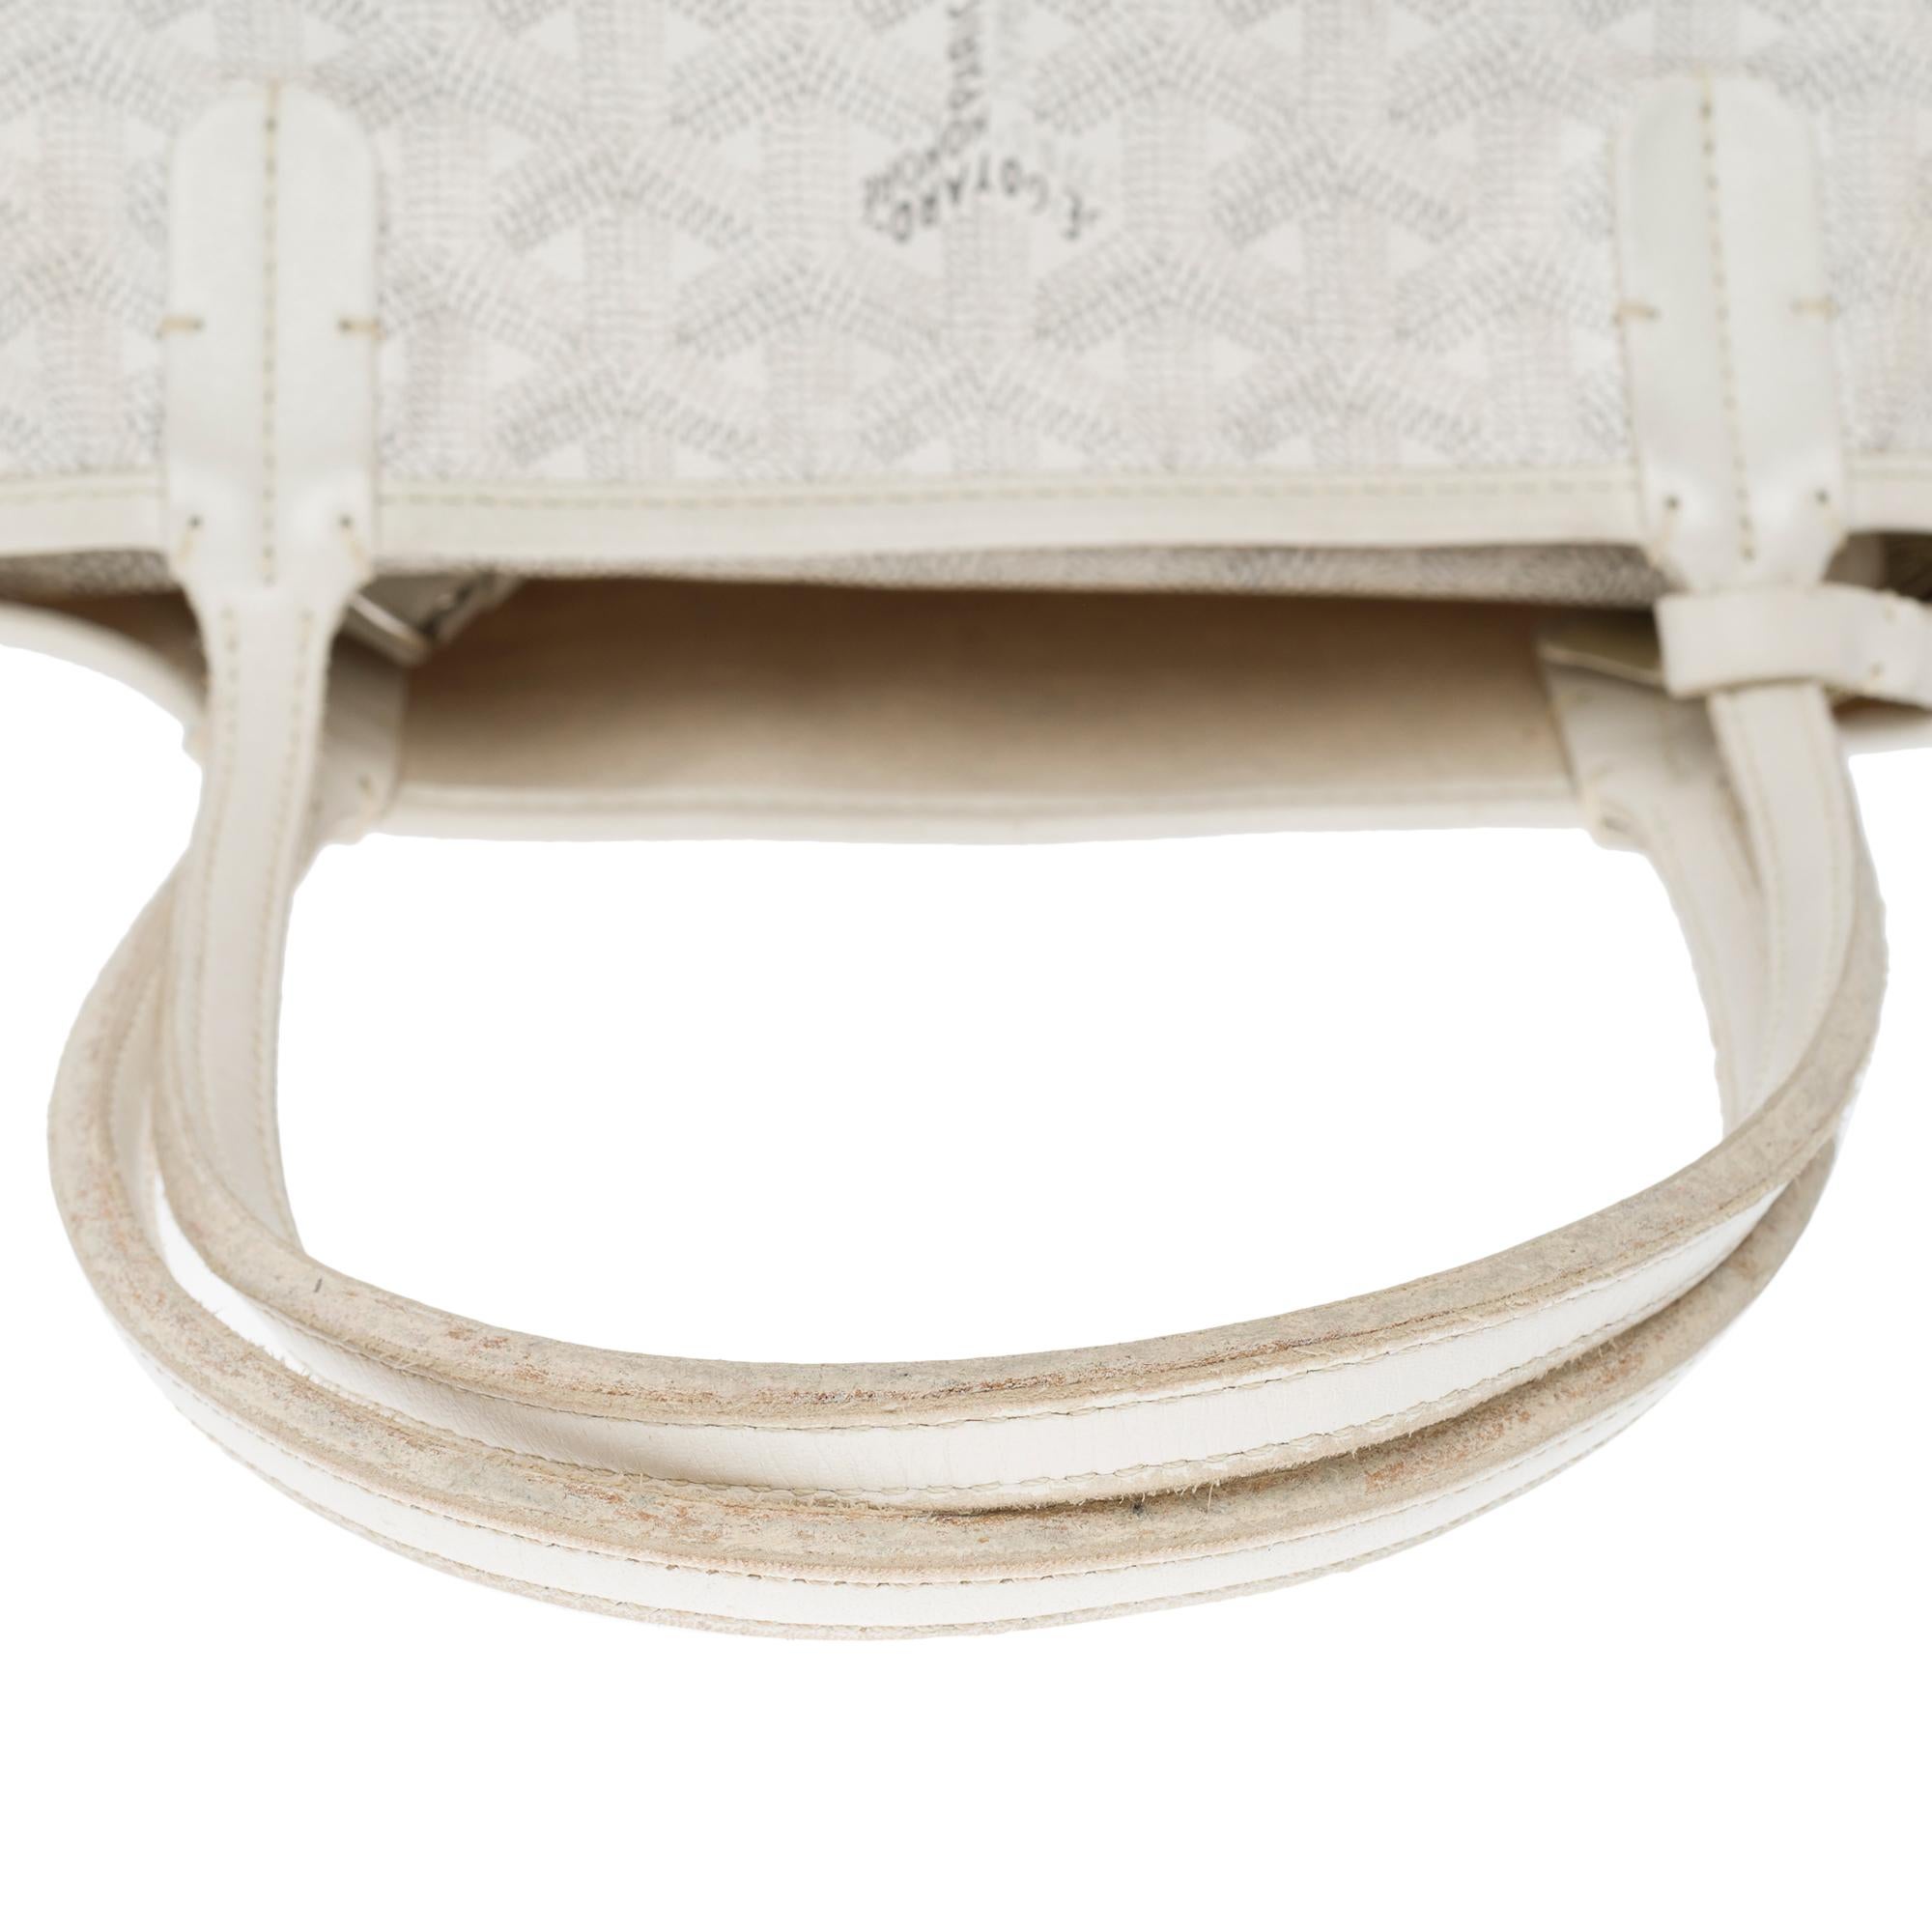 The Coveted Goyard Saint-Louis PM Tote bag in White canvas and leather, SHW 6